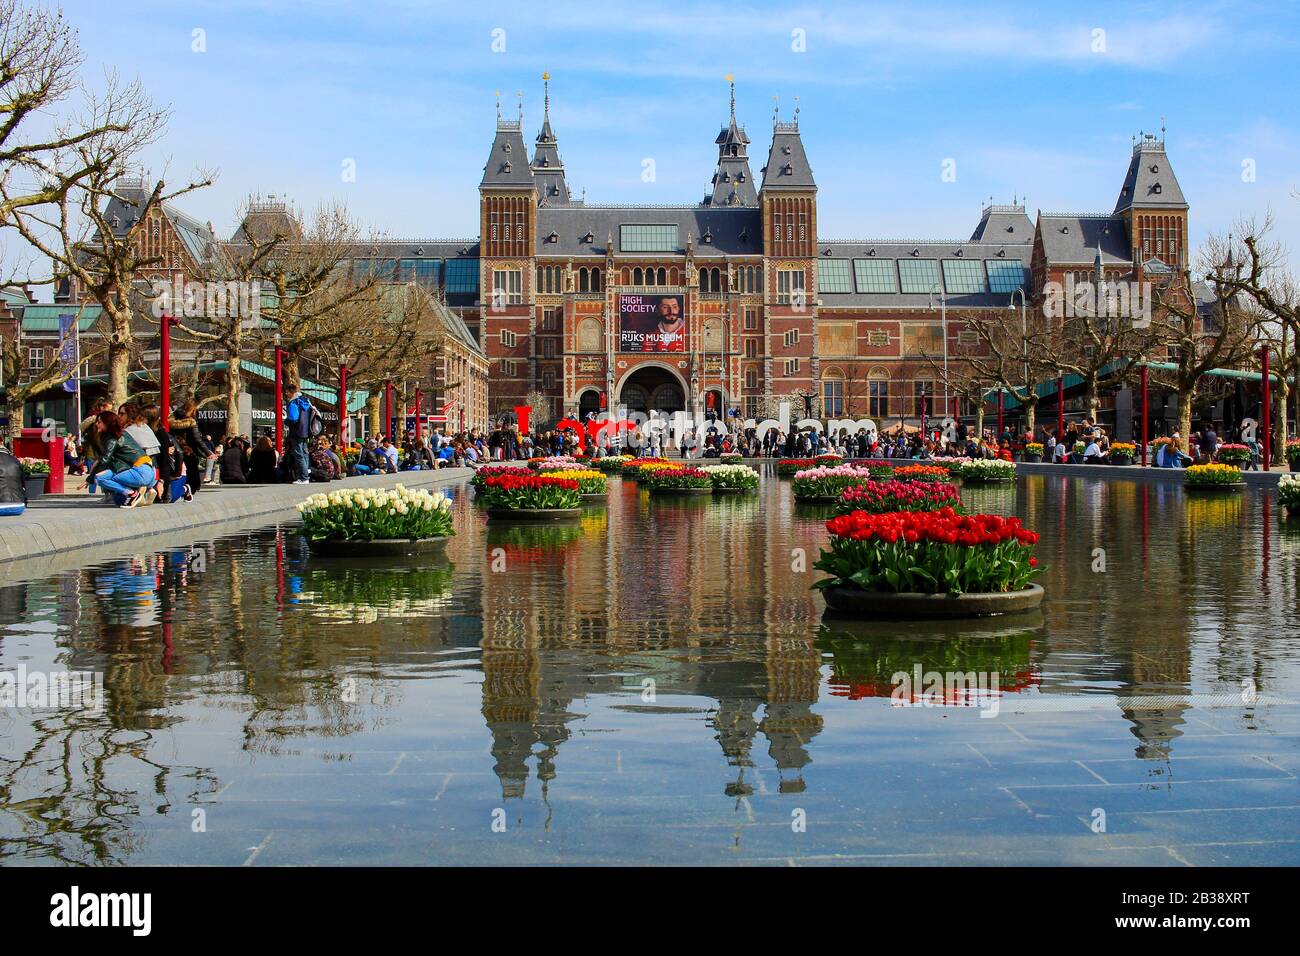 AMSTERDAM, NETHERLANDS - APRIL 22 2017: Rijksmuseum National Museum with I Amsterdam sign and tulips in the reflecting pool. Amsterdam, Netherlands Stock Photo